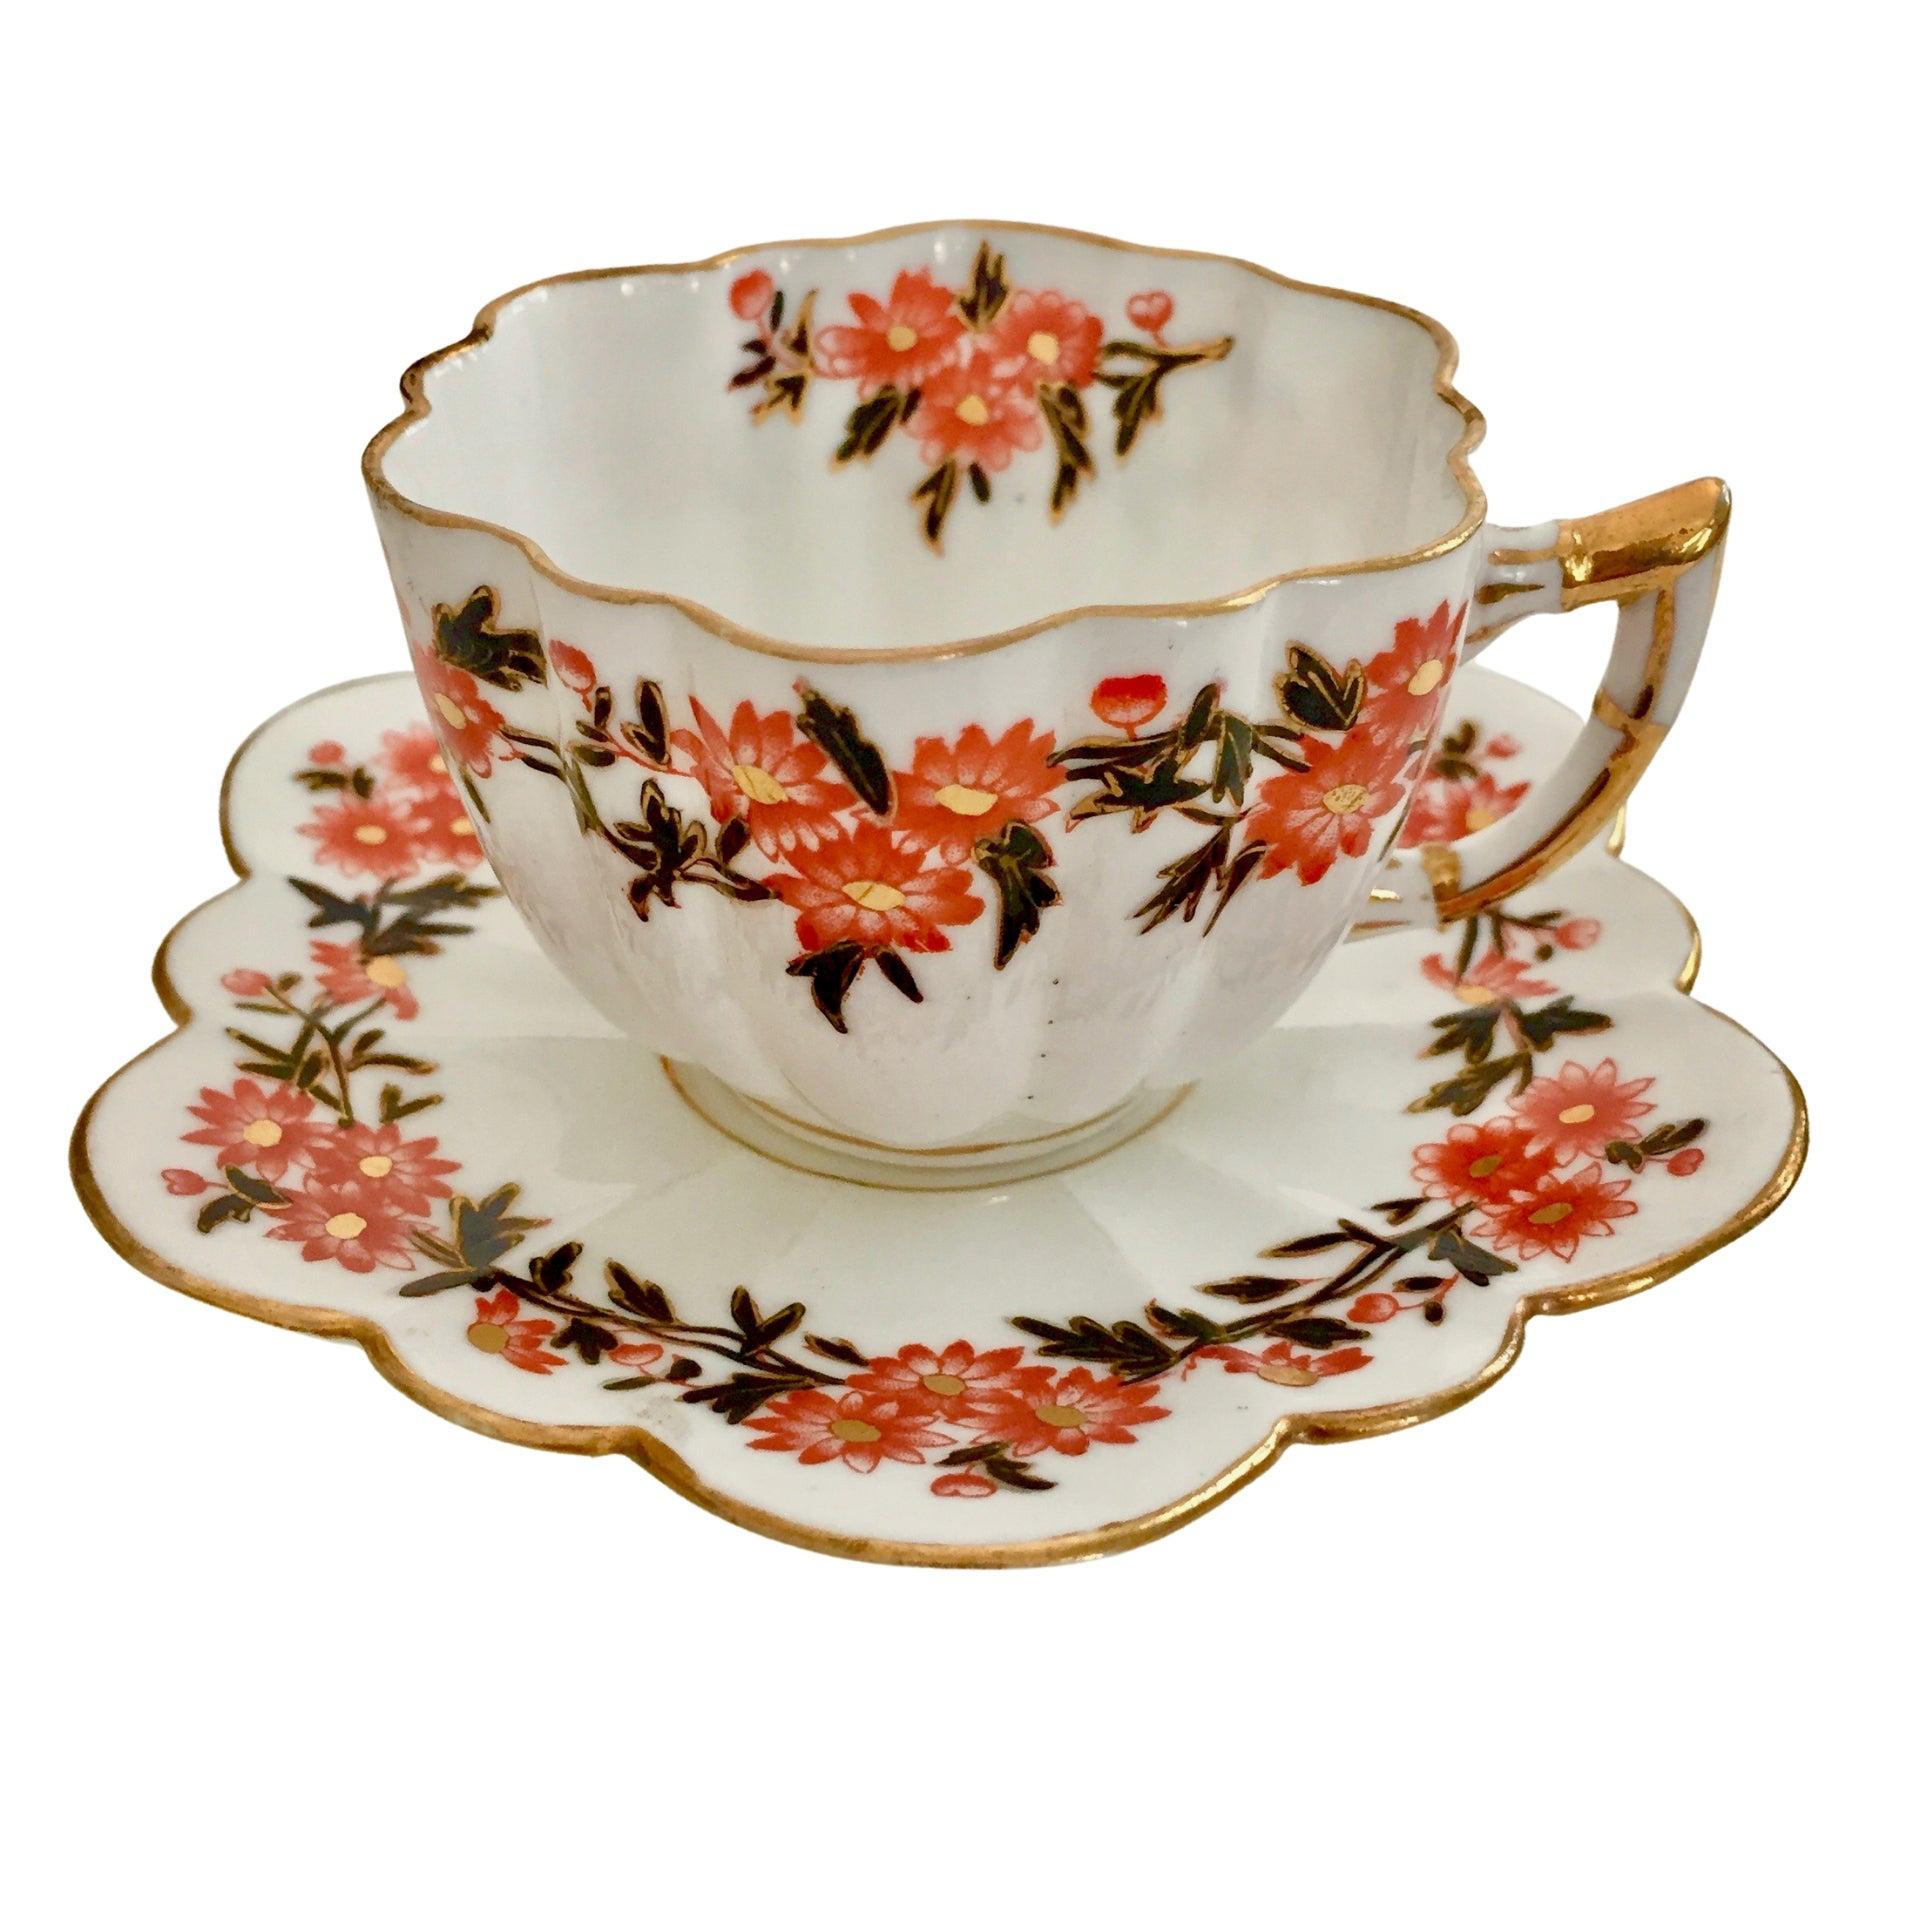 Wileman Porcelain Demitasse Cup and Saucer, Daisy Wreath, Red, Victorian, 1890